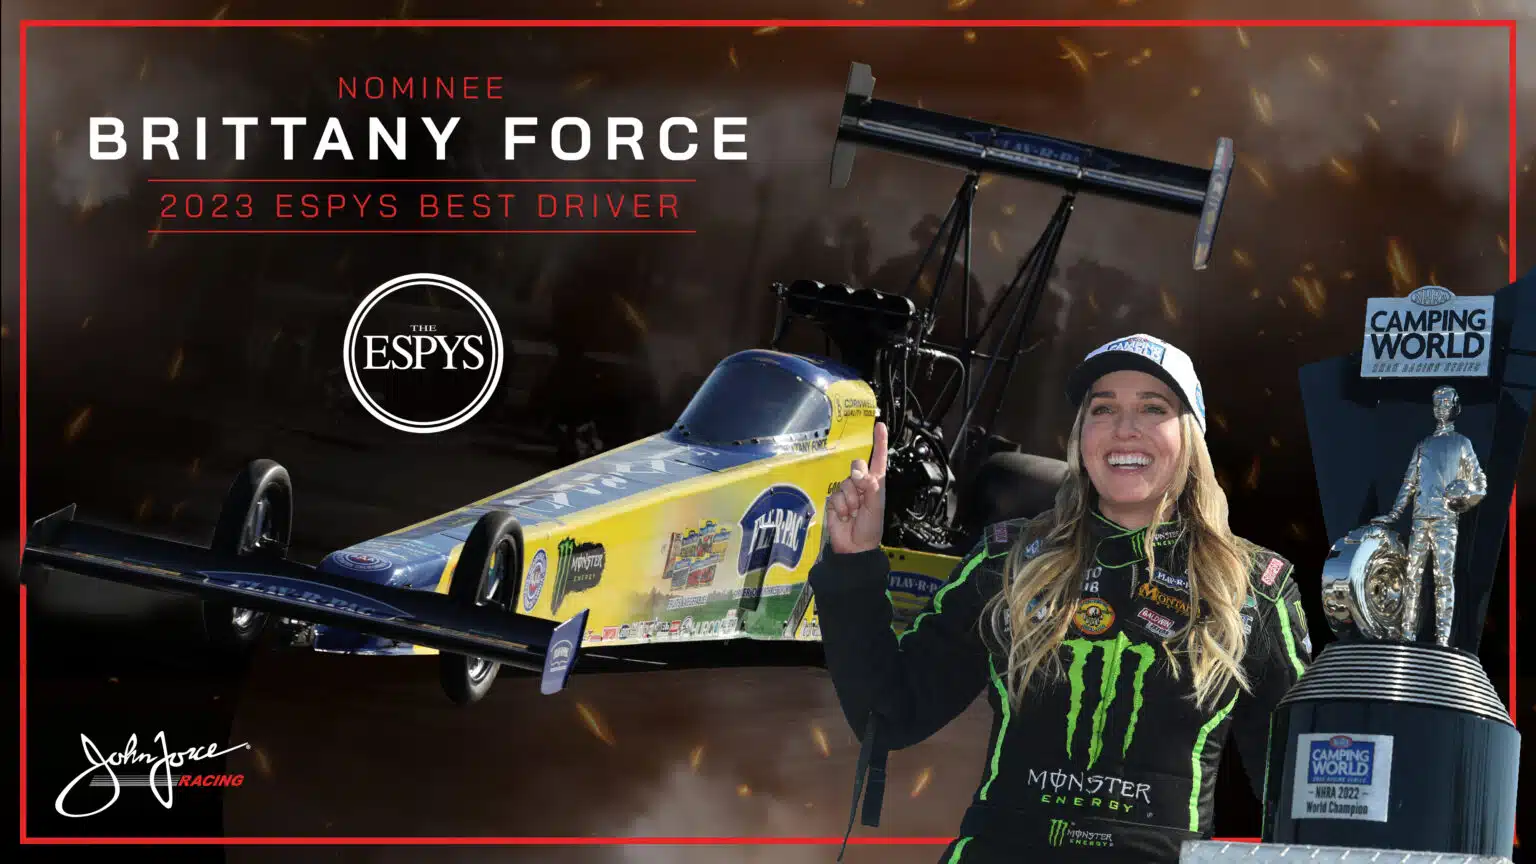 BRITTANY FORCE NOMINATED FOR ESPYS BEST DRIVER AWARD